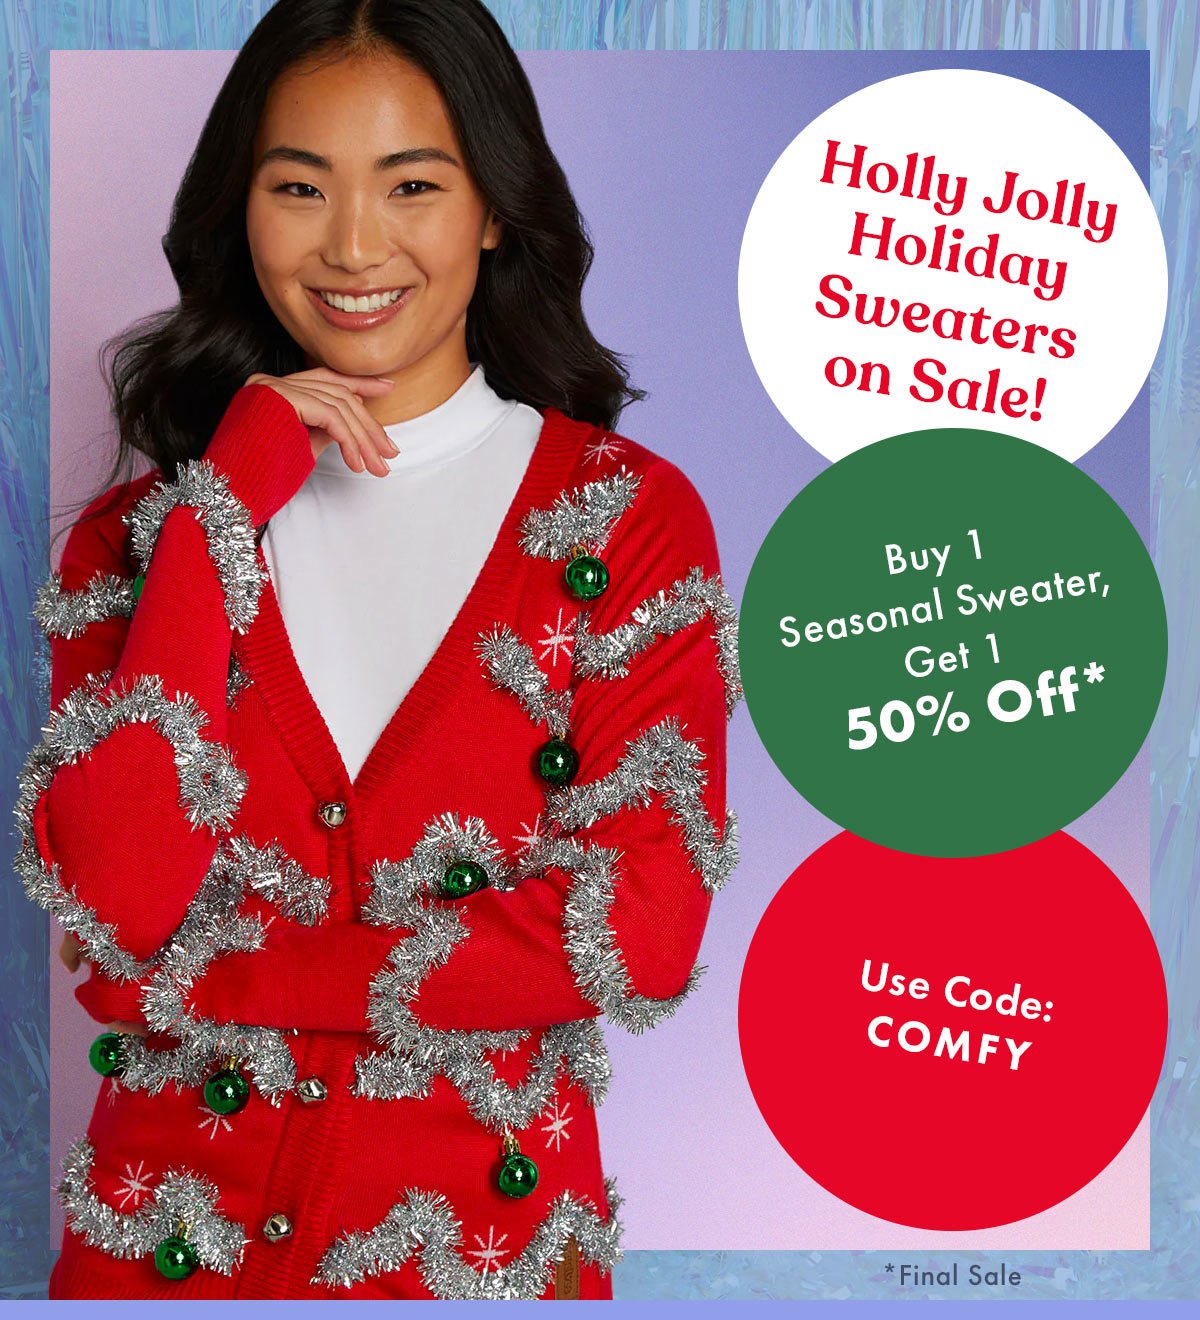 Holly Jolly Holiday Sweaters on Sale!